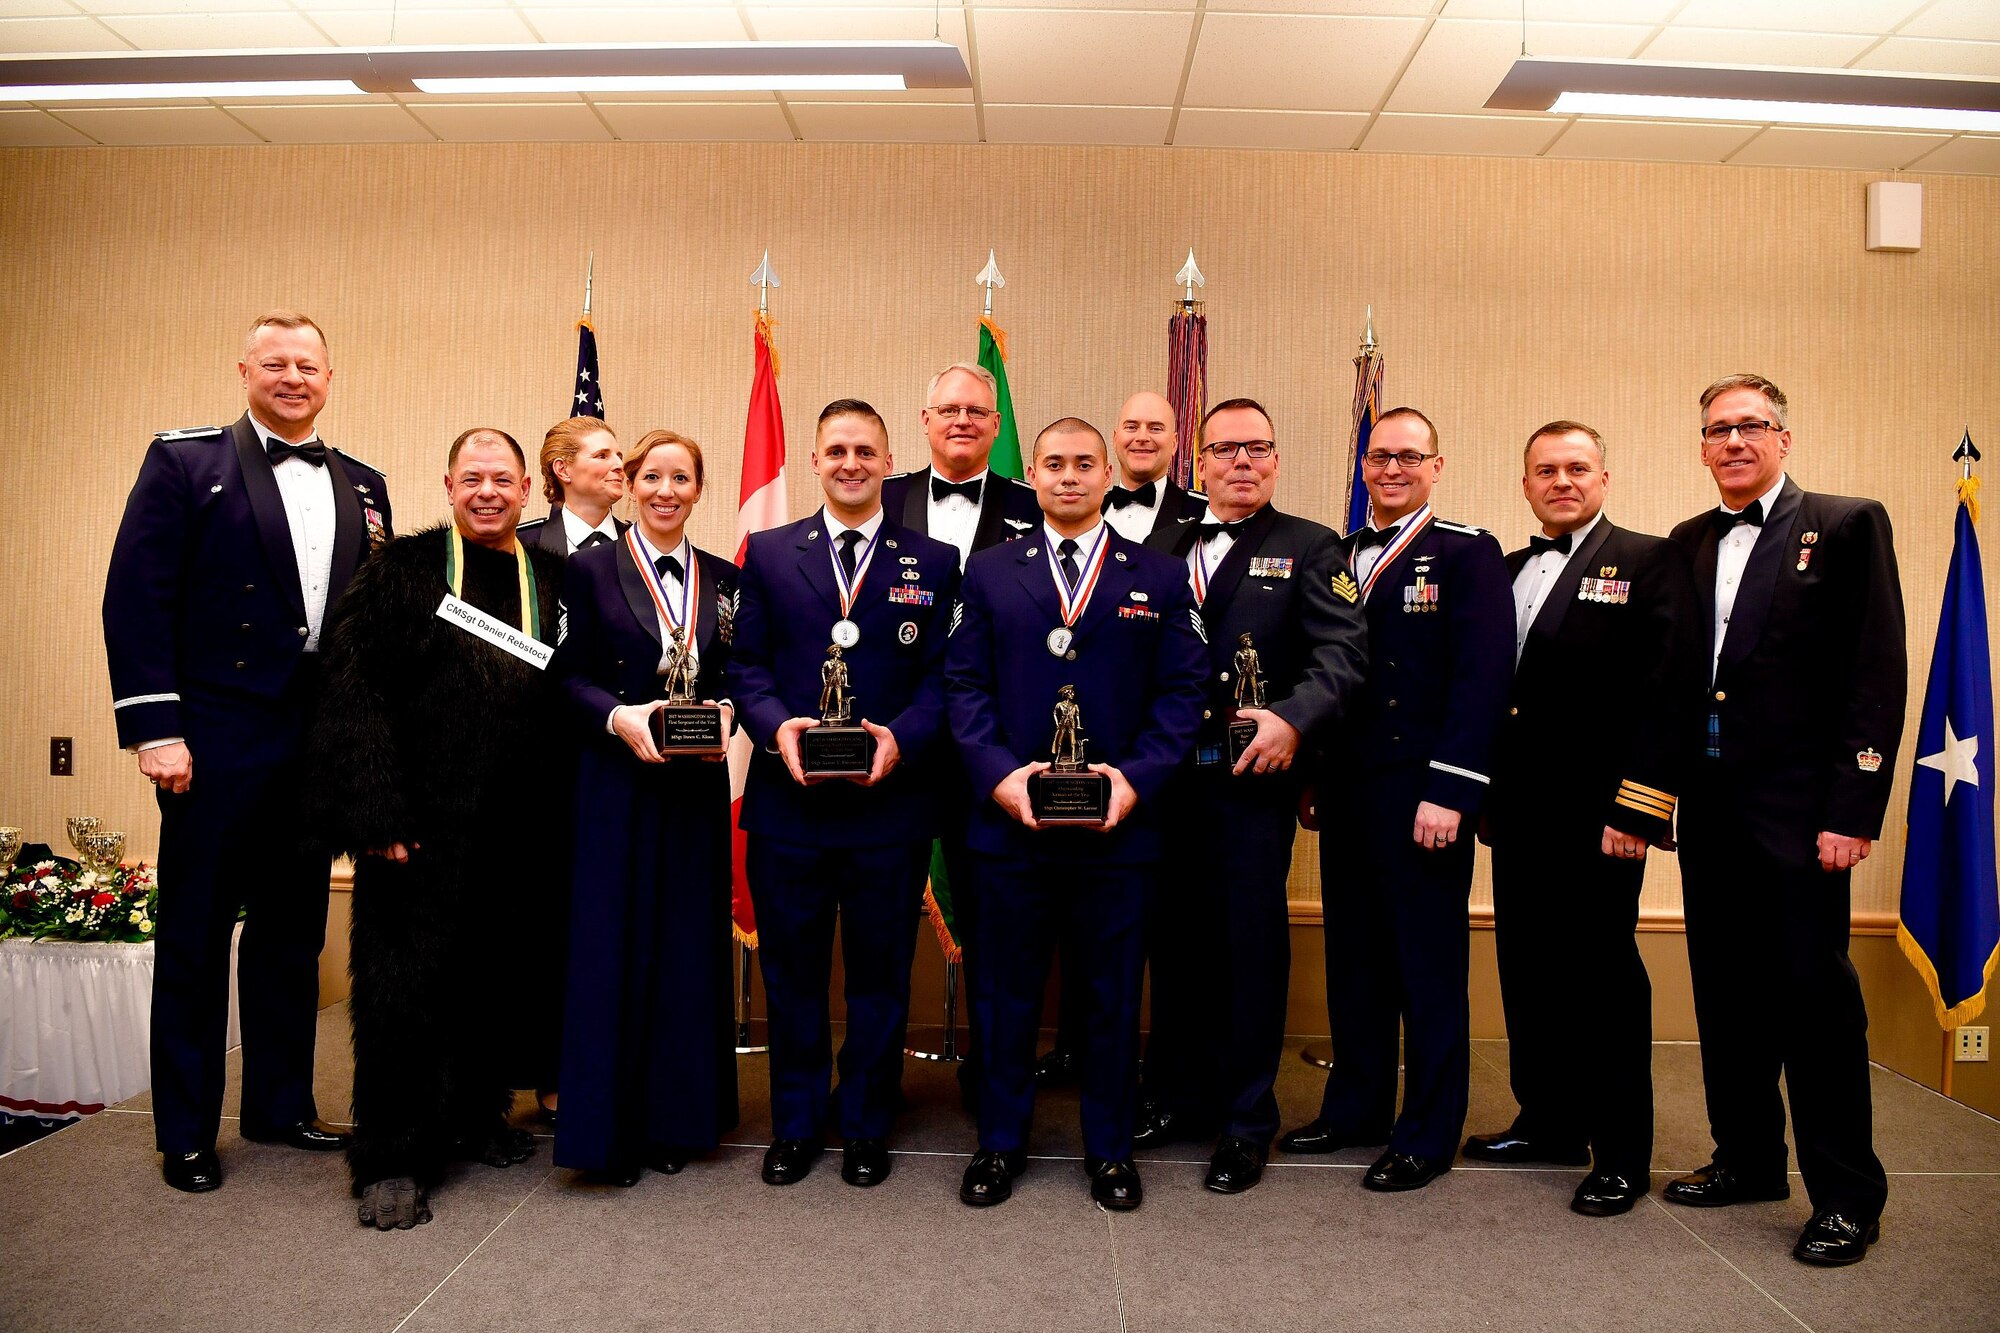 Annual award winners from the Western Air Defense Sector pose for a picture during the Washington Air National Guard's 9th Annual Awards Banquet held at the American Lake Conference Center on Joint Base Lewis-McChord, Washington, Jan. 27, 2018.  Pictured from left are: Col. Gregor Leist, WADS commander, Chief Master Sgt. Daniel Rebstock, WADS senior enlisted advisor, Col. Paige Abbott, 225th Support Squadron commander, Master Sgt. Dawn Kloos, 225th Air Defense Group first sergeant, Staff Sgt. Aaron DeCremer, 225th Air Defense Squadron, Col. William Krueger, 225th Air Defense Group commander, Staff Sgt. Christopher LaCour, 225th SS, Col. Brett Bosselmann, 225th ADS commander, Royal Canadian Air Force Sgt. Yves Truchon, 225th ADS and Canadian Detachment, Capt. Joseph Hale, 225th SS, RCAF Lt. Col. Matthew Wappler, Canadian Detachment commander, RCAF Warrant Officer Gilles Turgeon, Canadian Detachment unit warrant officer.  (U.S. Air National Guard Photo by Tech. Sgt. Timothy Chacon)